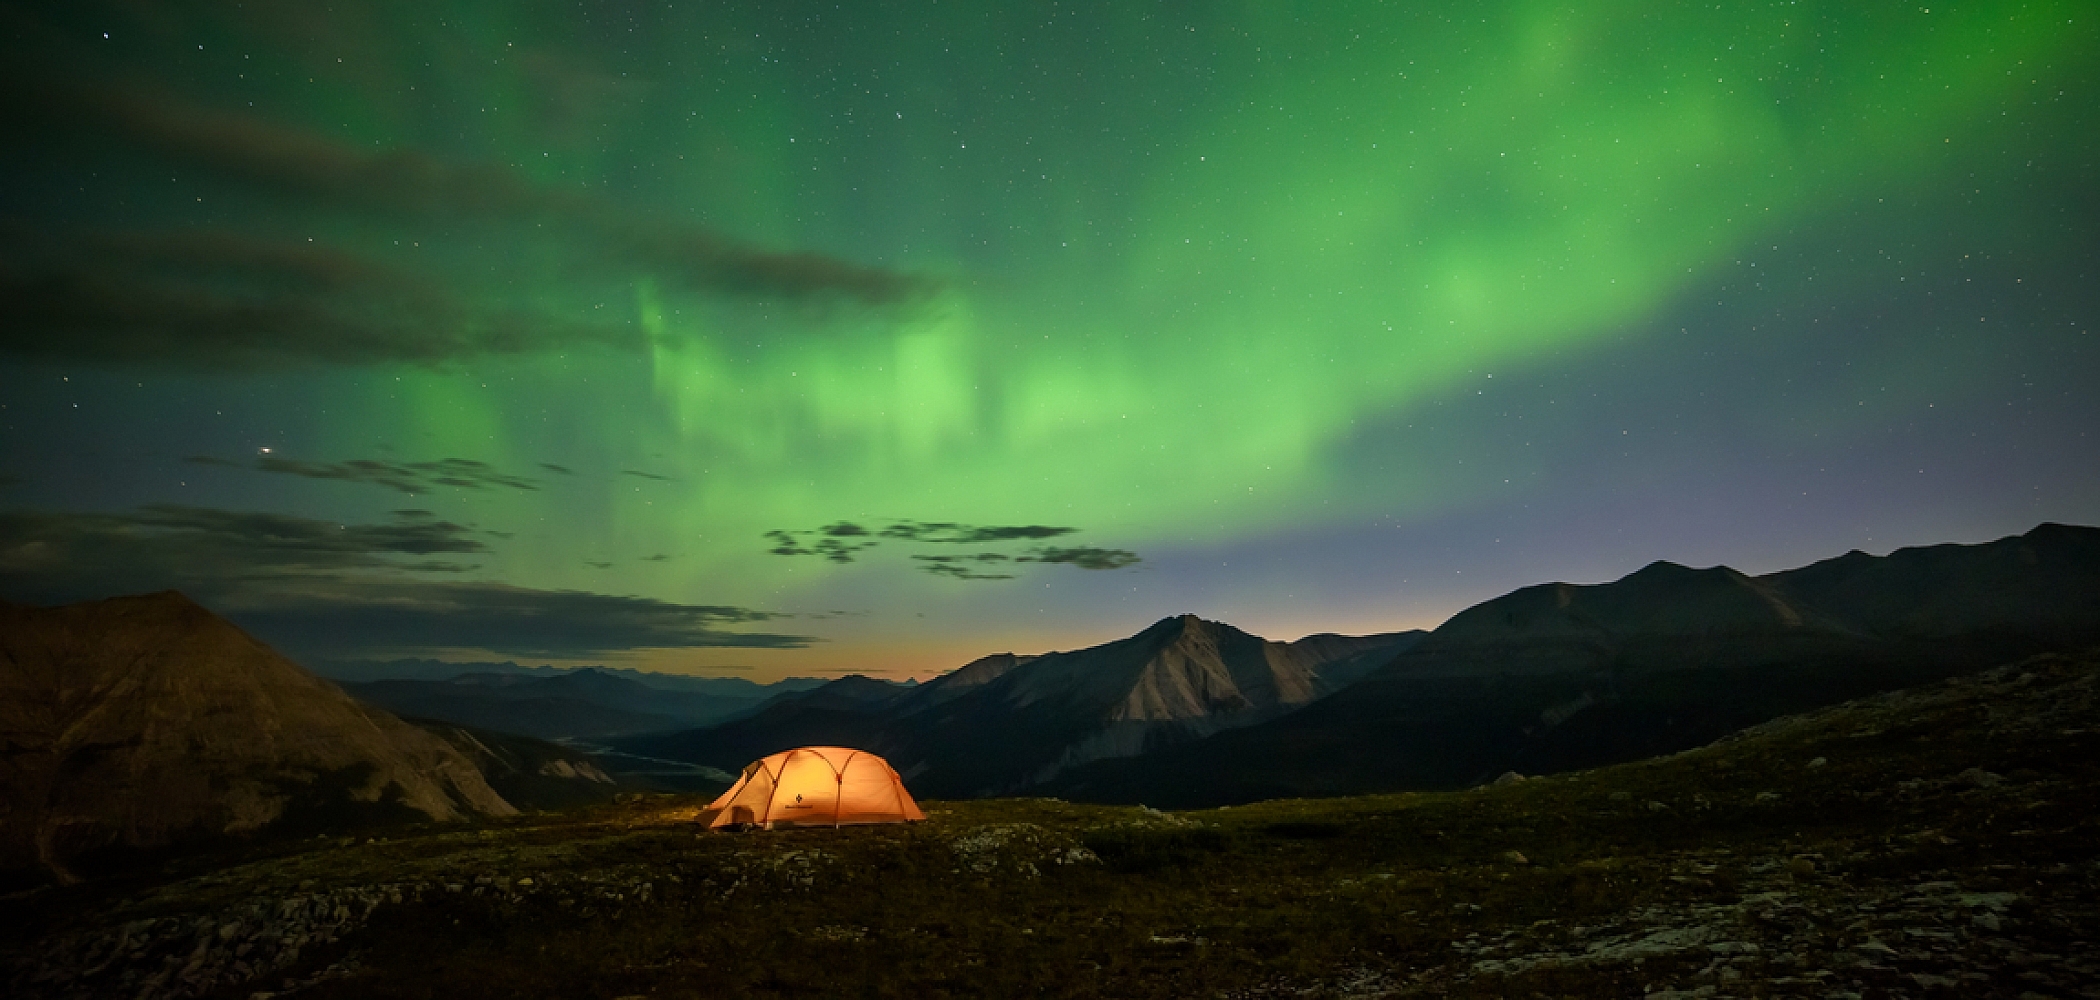 An illuminated tent under the vibrant green Northern Lights.